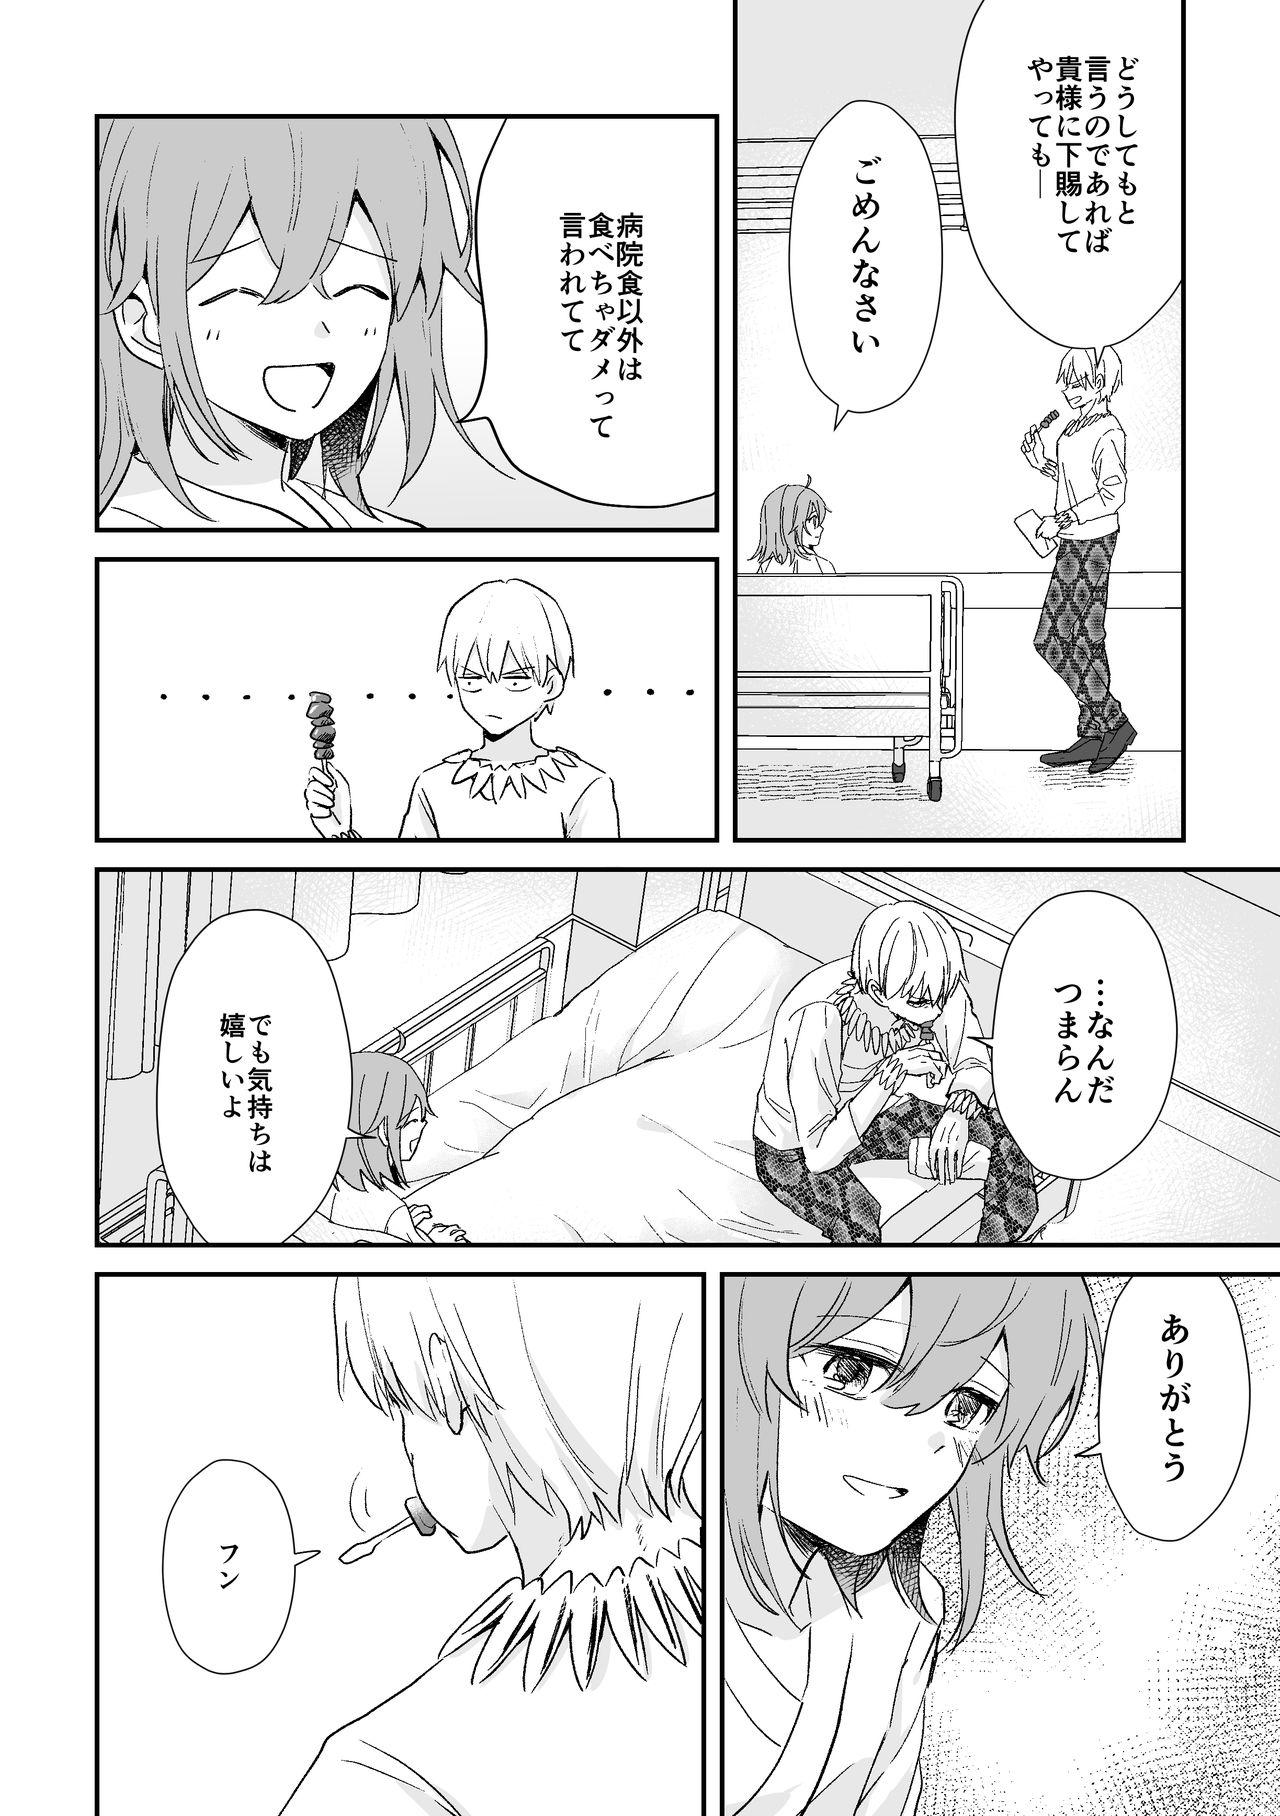 Stepfather Yomei Ichinen no Master 2 - Fate grand order Doublepenetration - Page 4